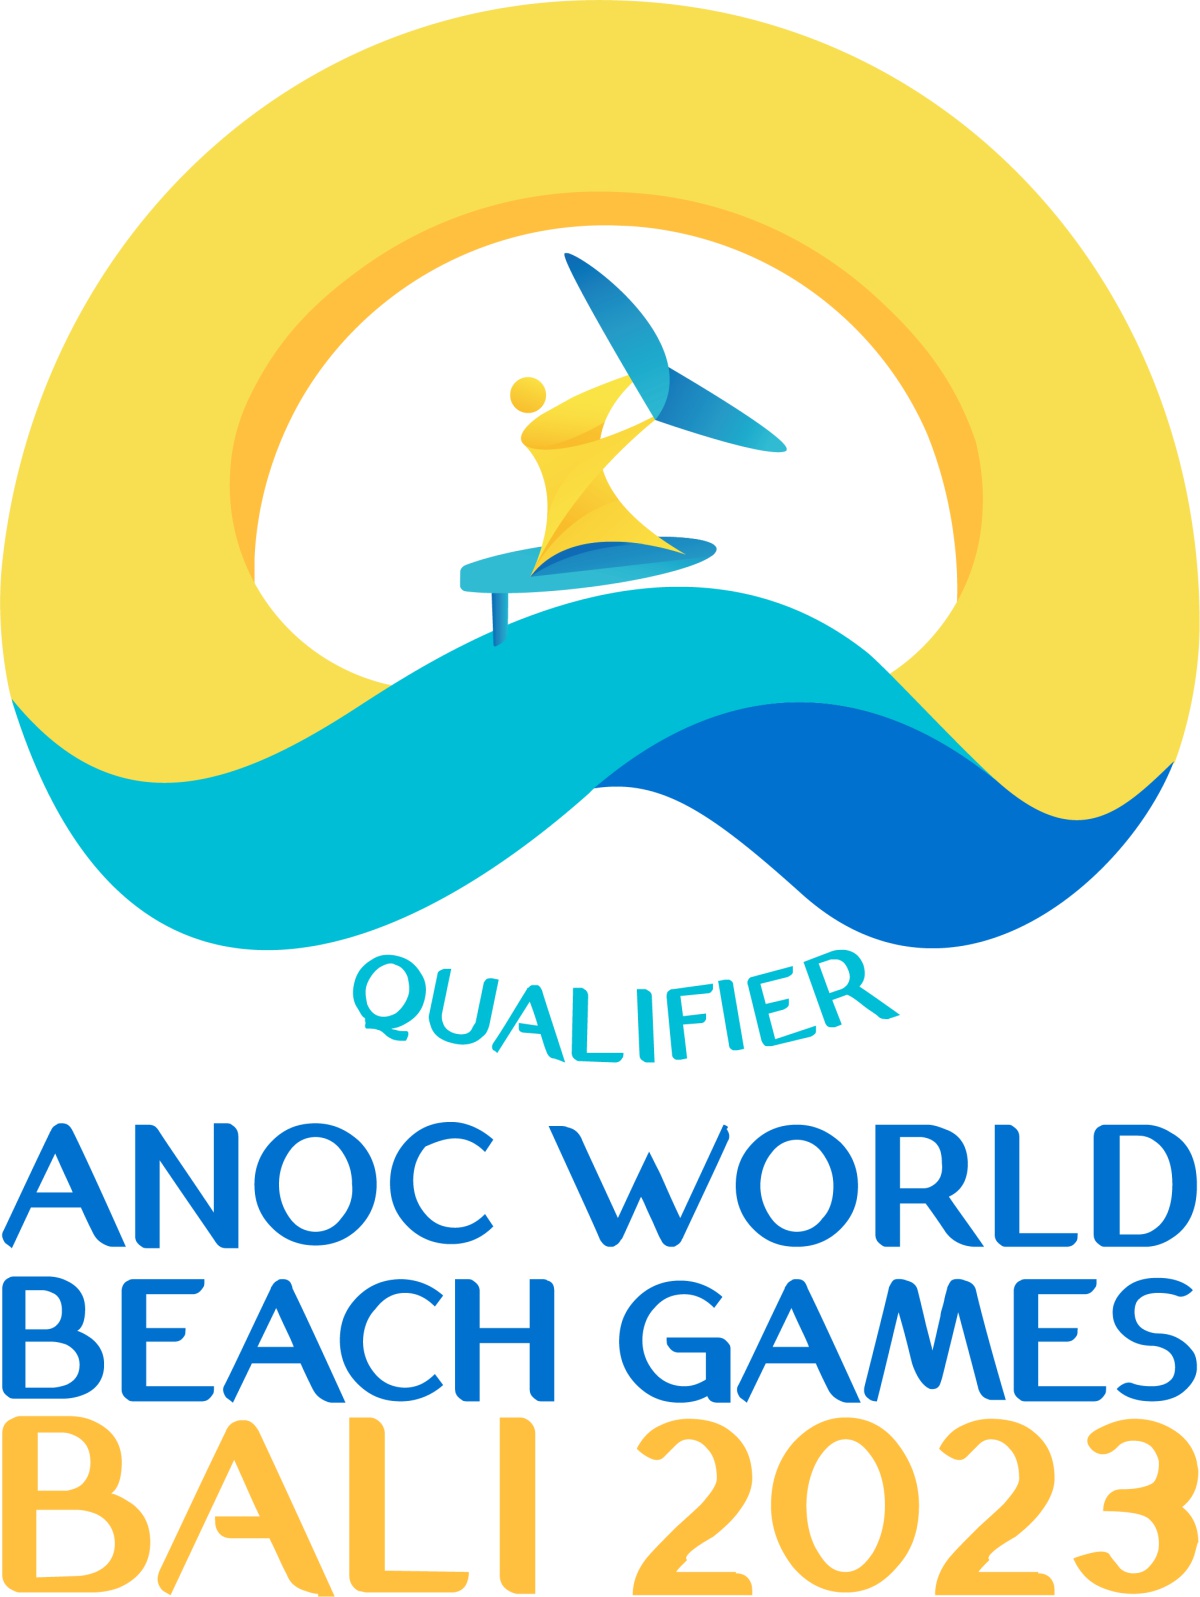 WINGFOIL RACING TO BE PART OF THE PROGRAMME AT ANOC WORLD BEACH GAMES BALI 2023